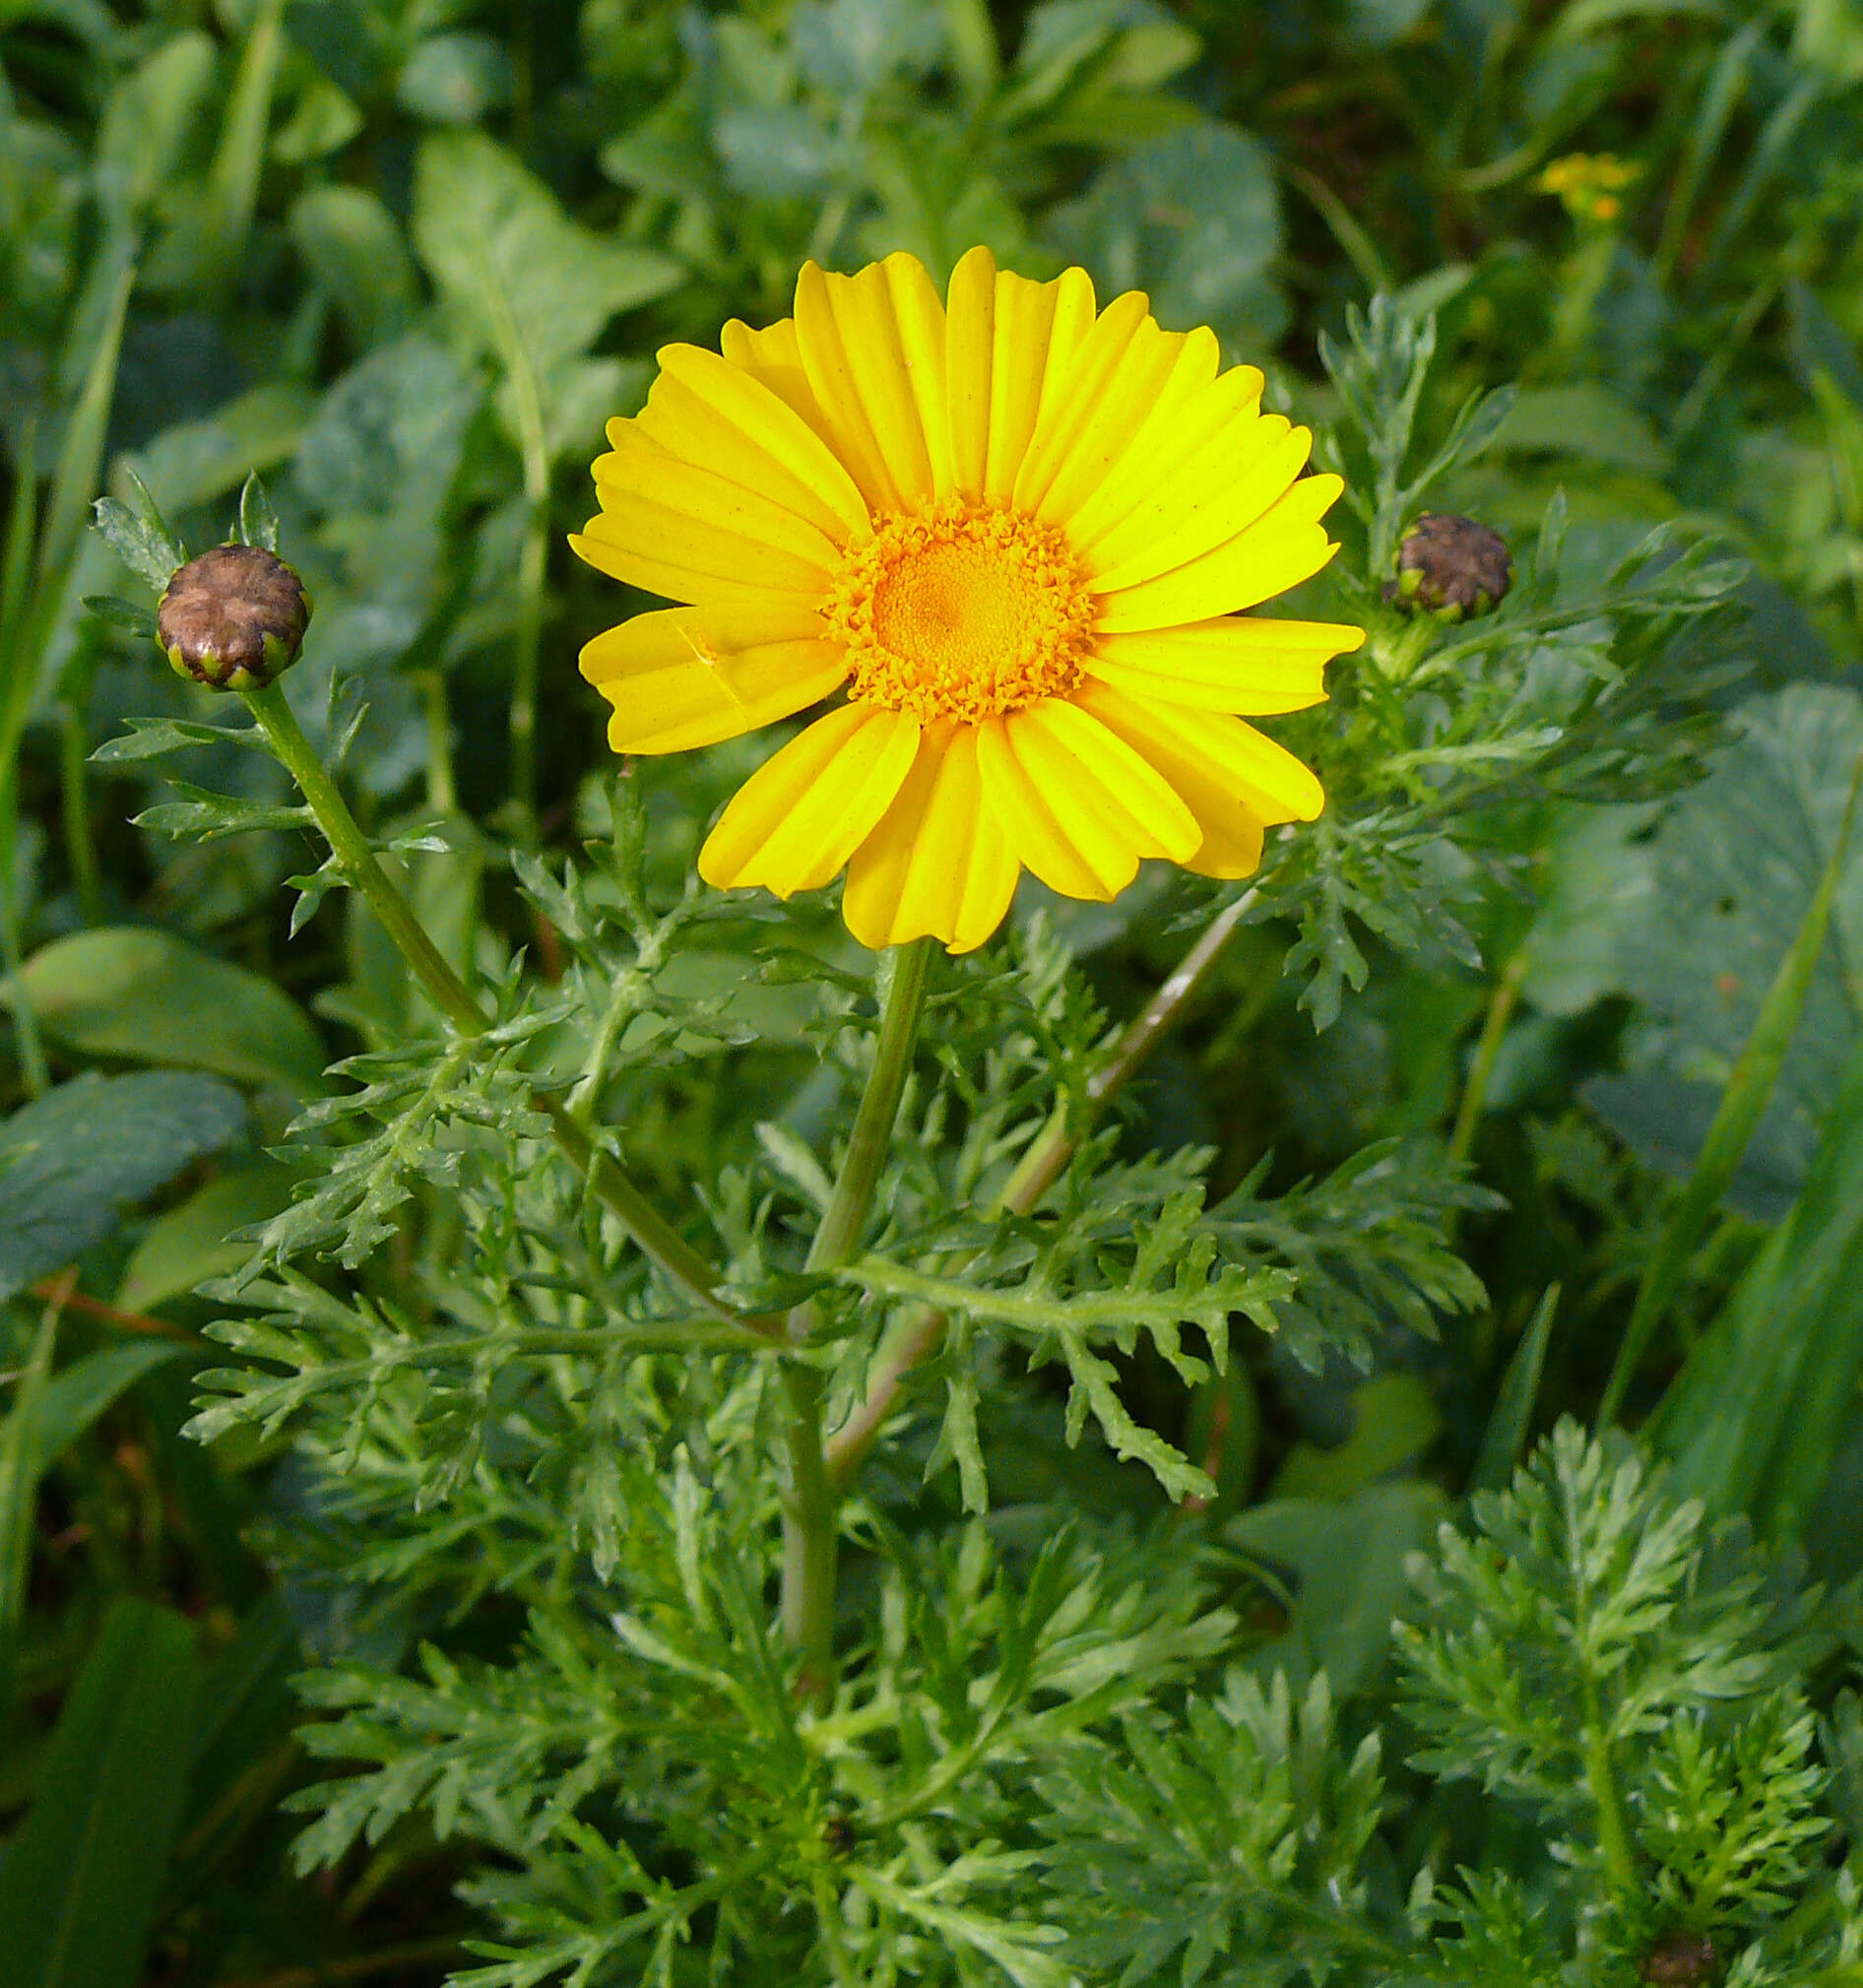 Image of Crown daisy